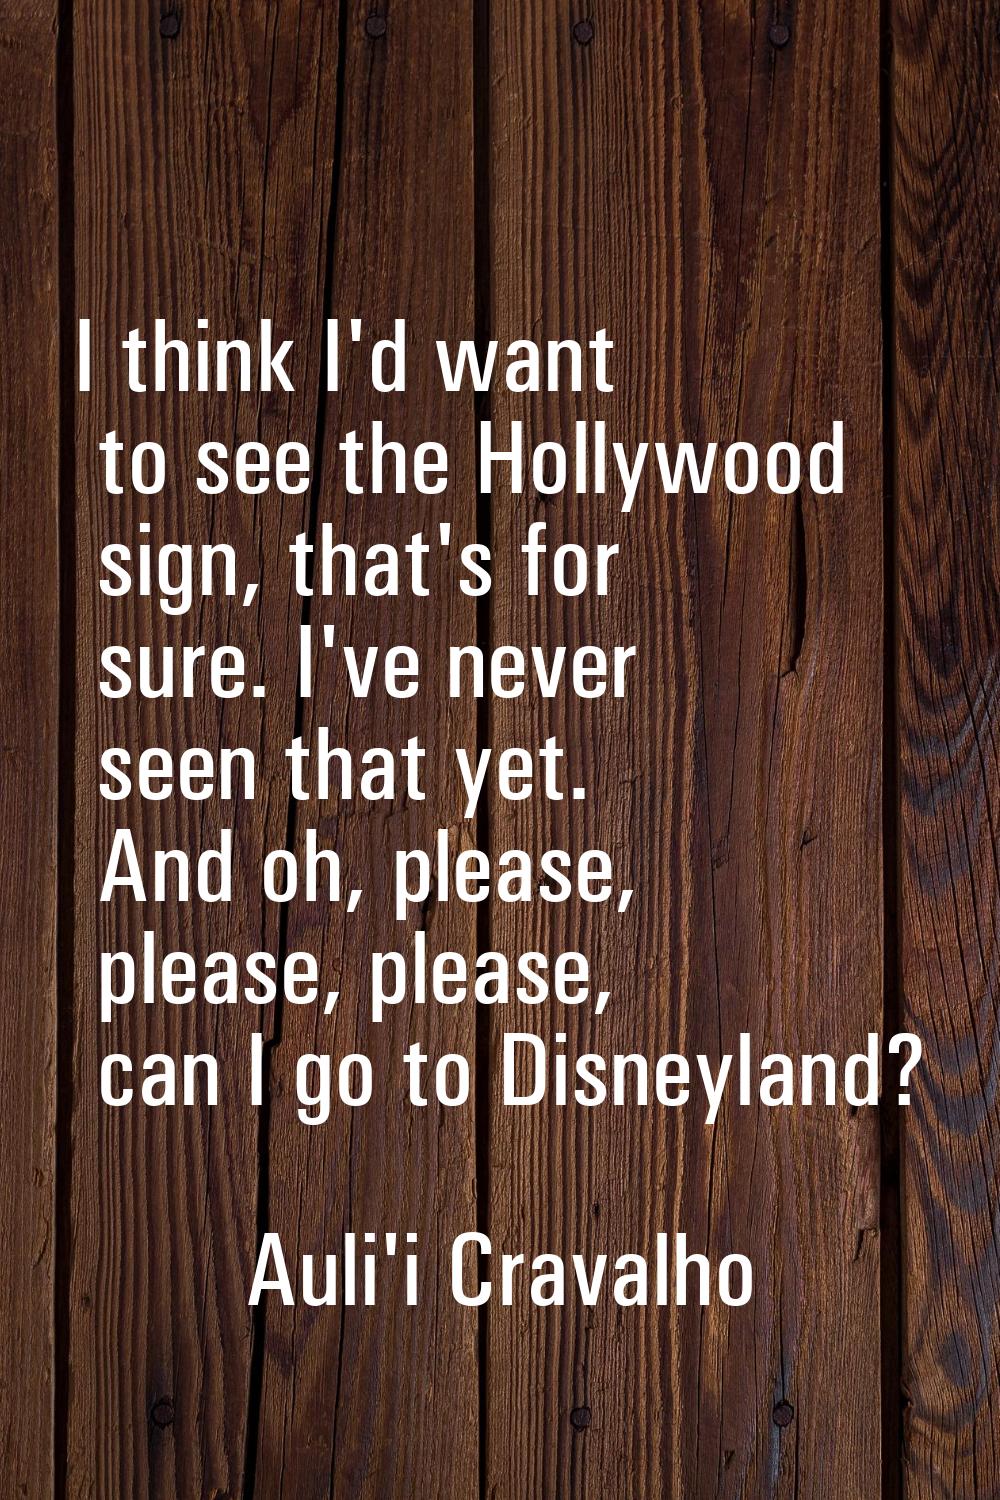 I think I'd want to see the Hollywood sign, that's for sure. I've never seen that yet. And oh, plea